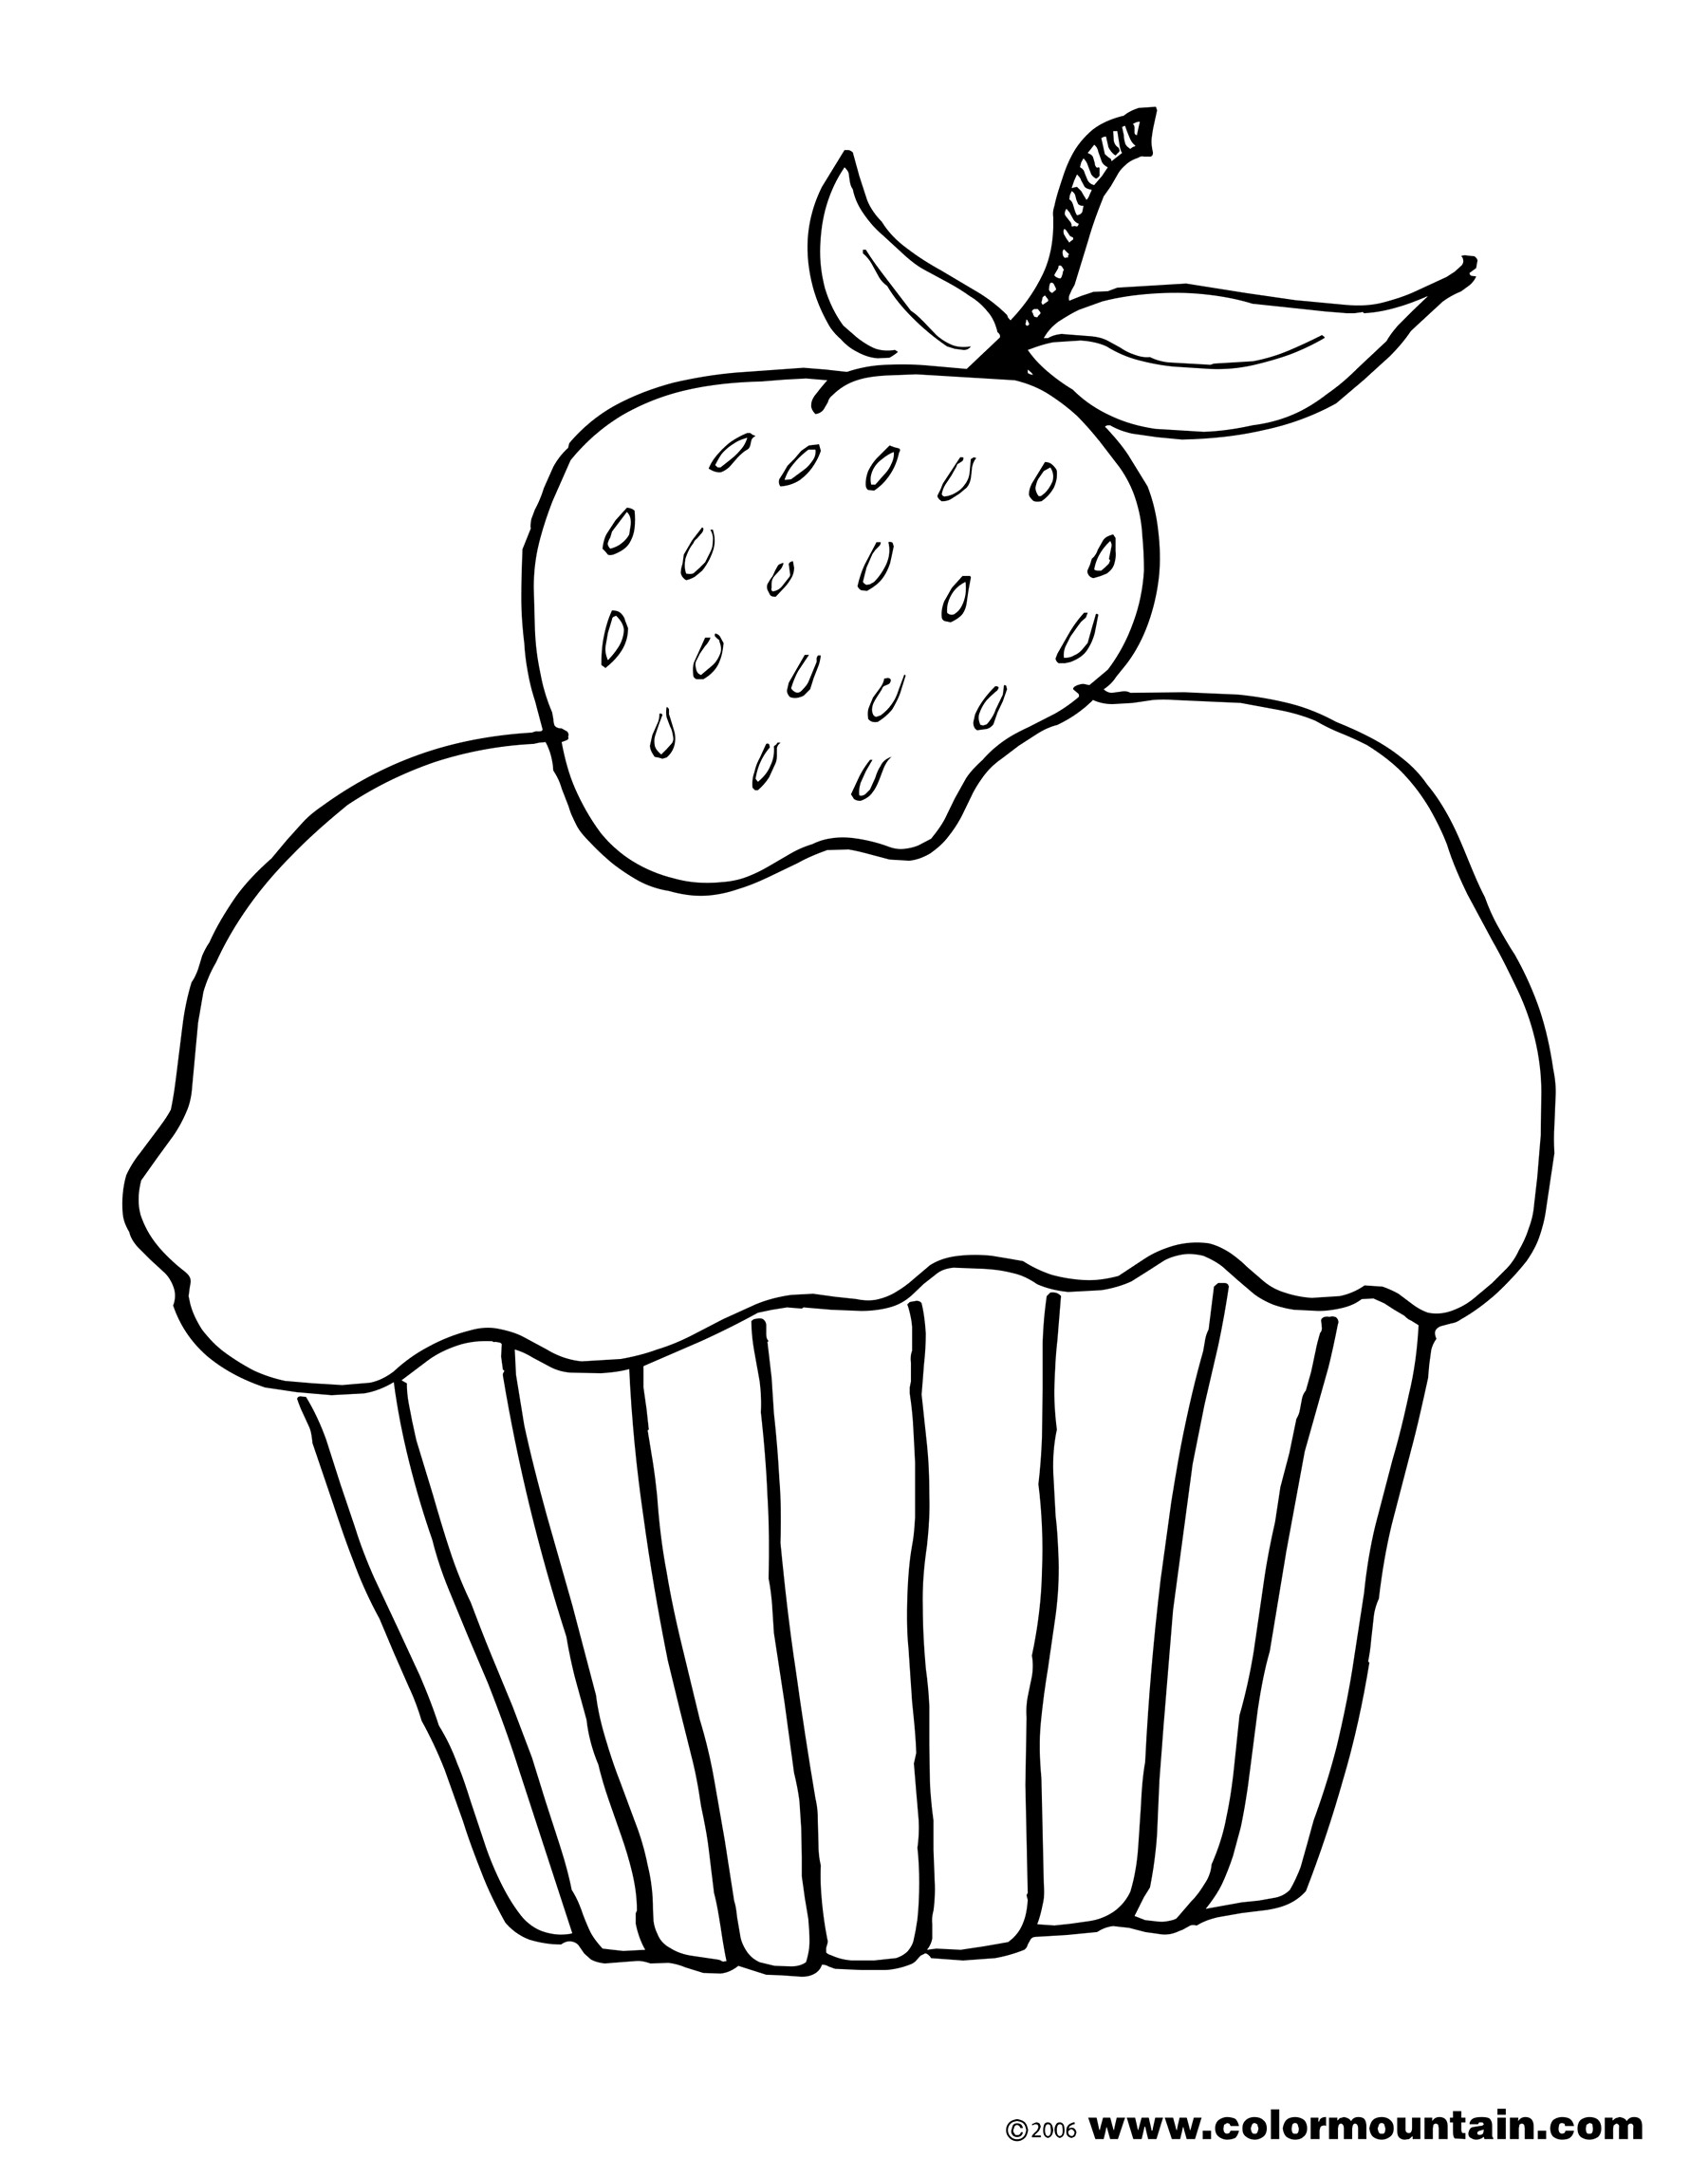 Chocolate Cake Coloring Page at GetColoringscom Free